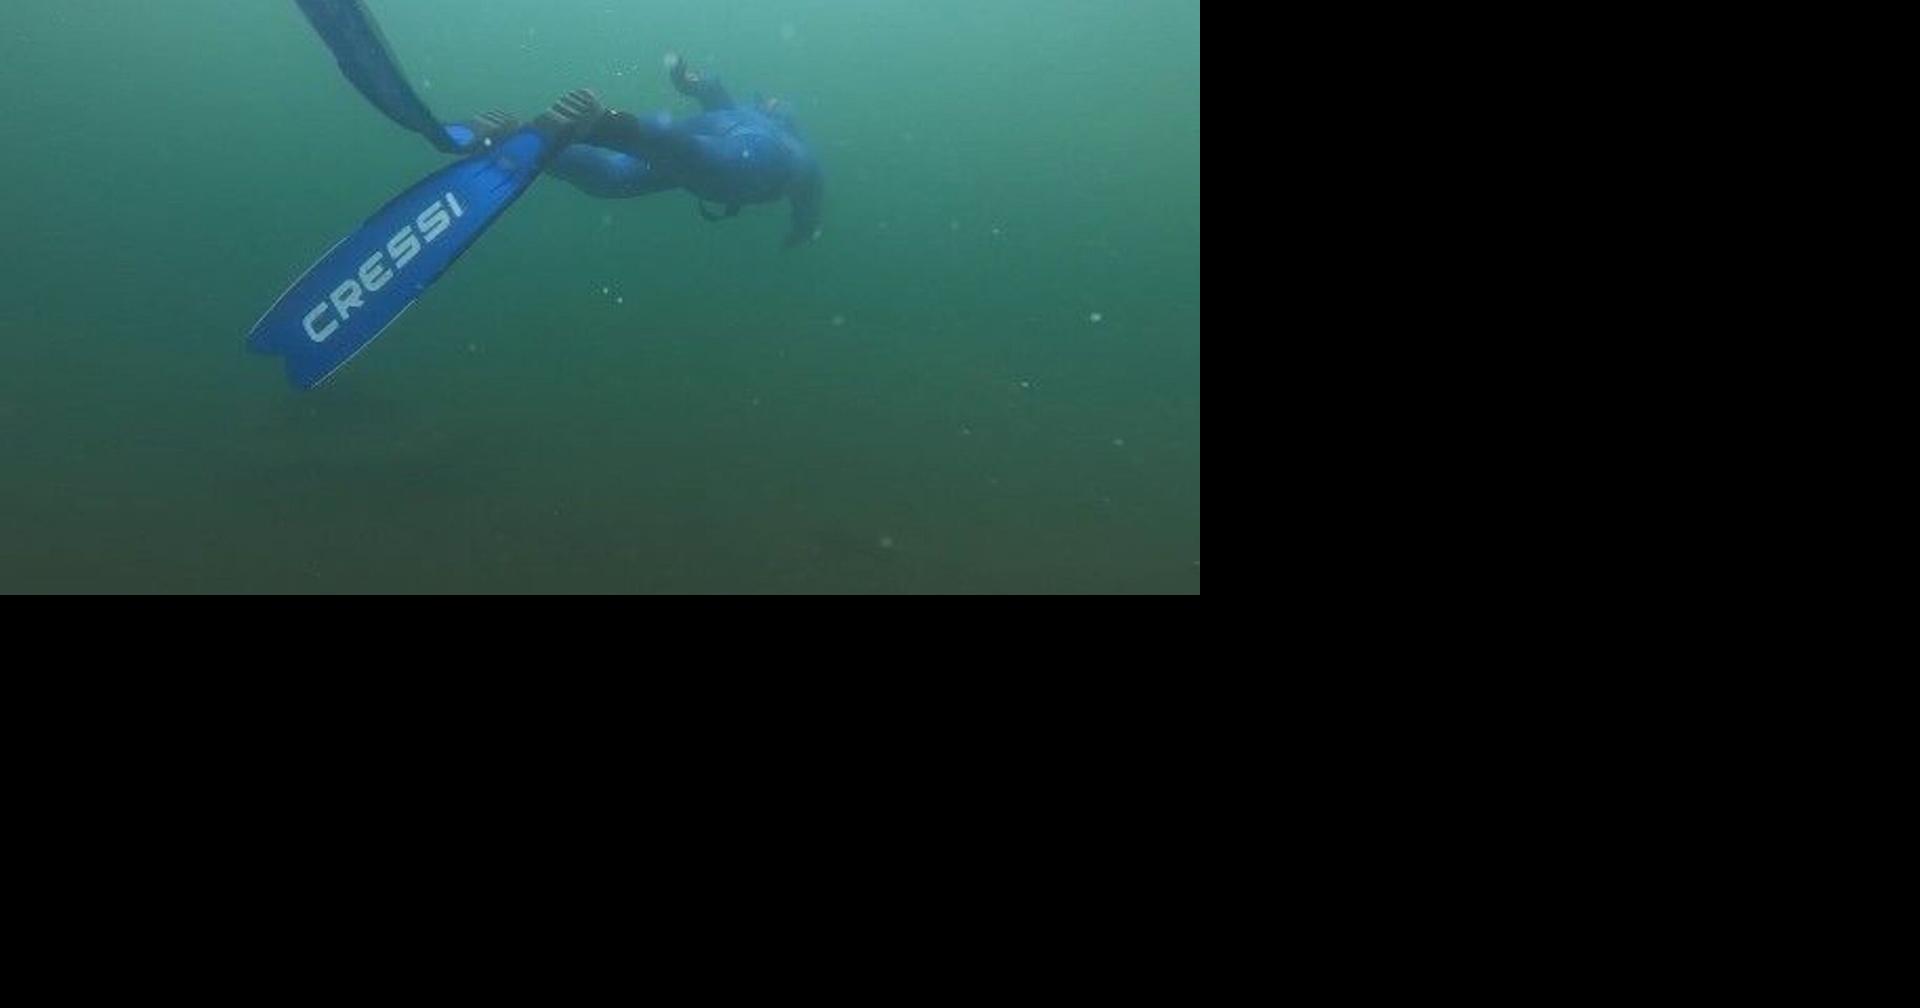 Wisconsin freediver that can hold his breath for more than 3 minutes pushes boundaries